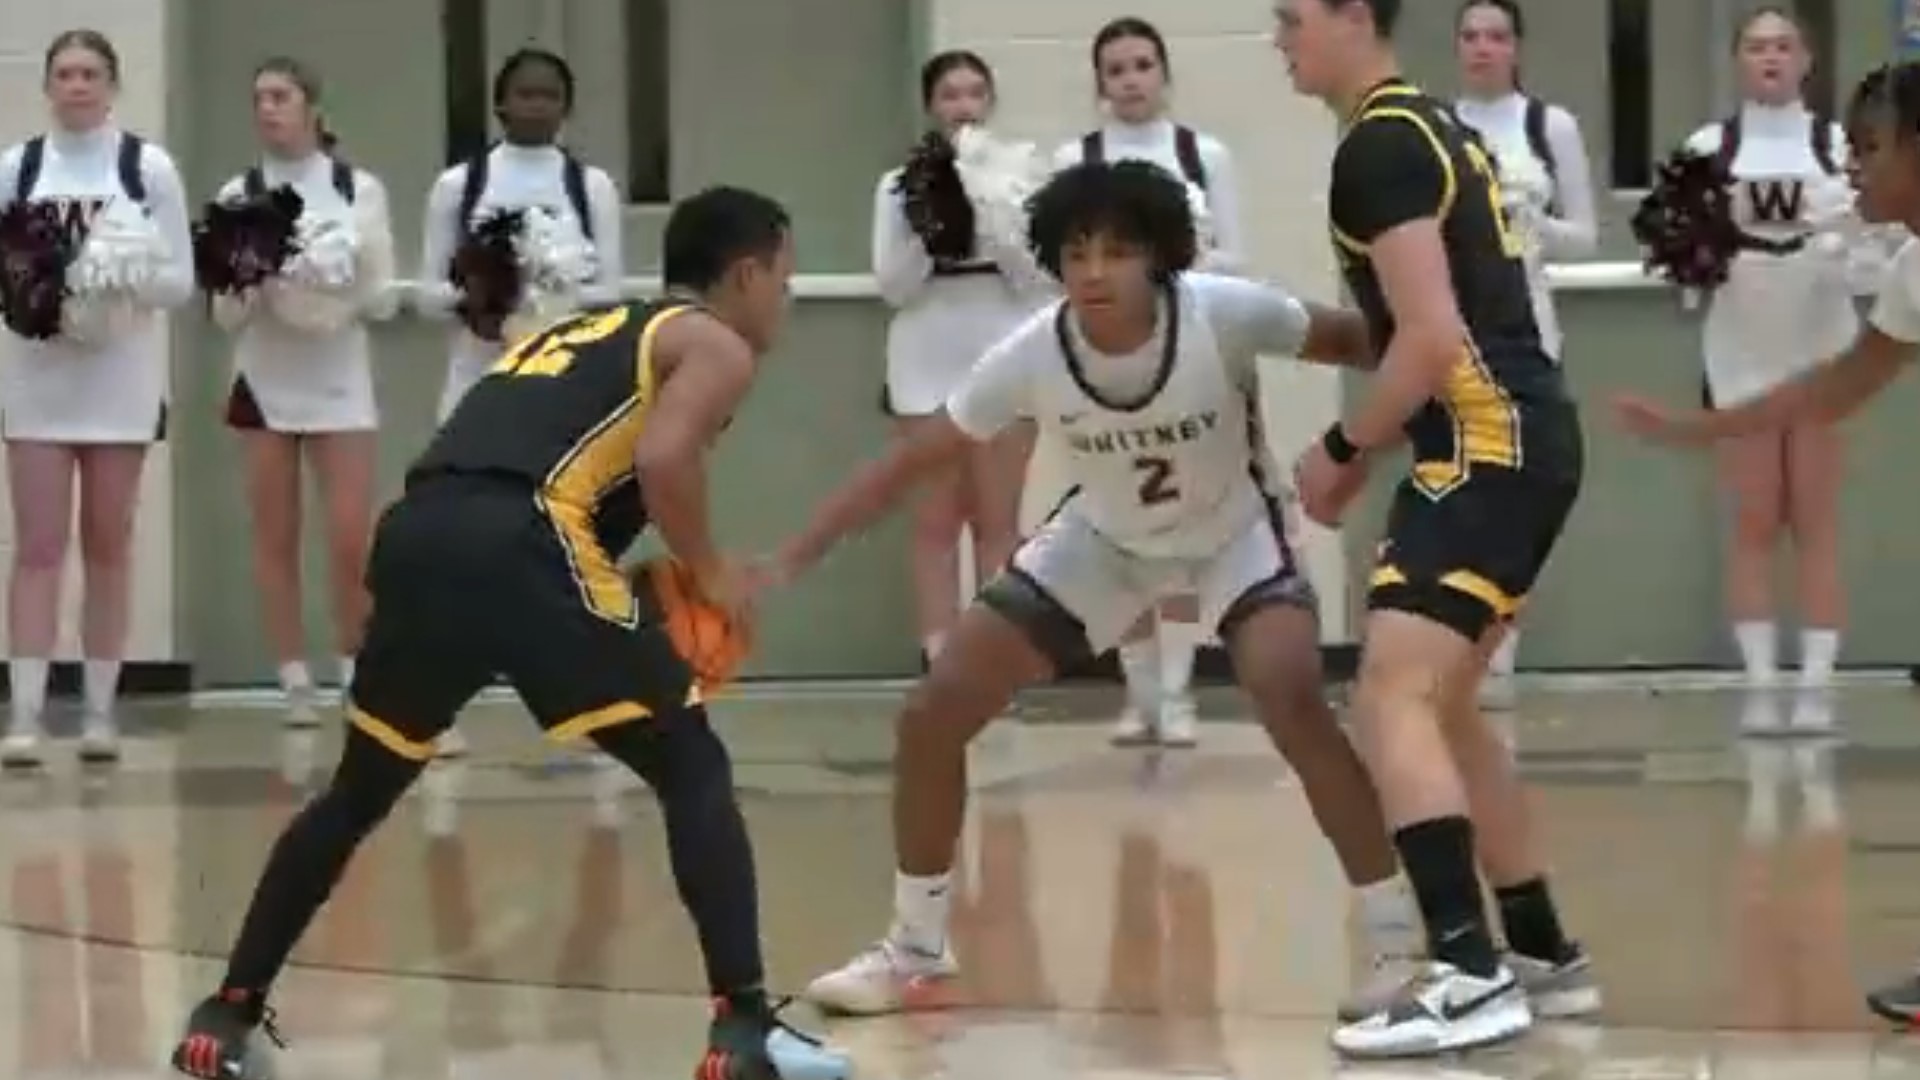 The Del Oro Golden Eagles narrowly defeated the Whitney Wildcats 63-61.